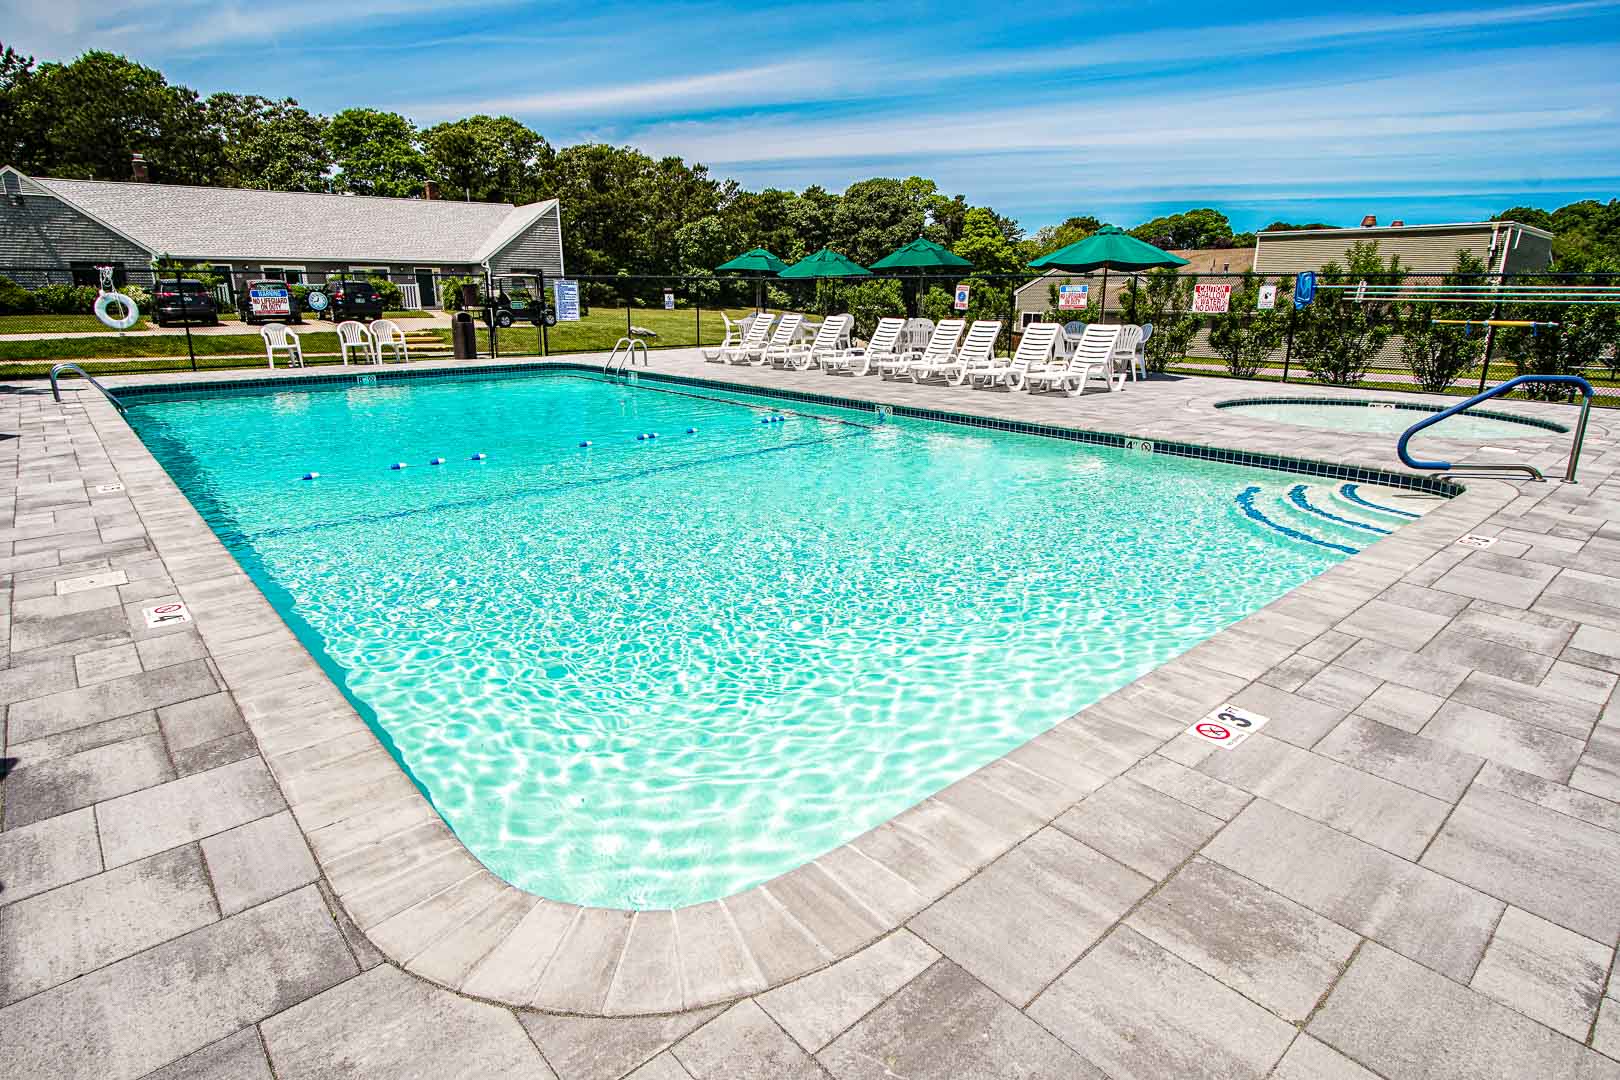 A crisp and clean outdoor swimming pool at VRI's Brewster Green Resort in Massachusetts.